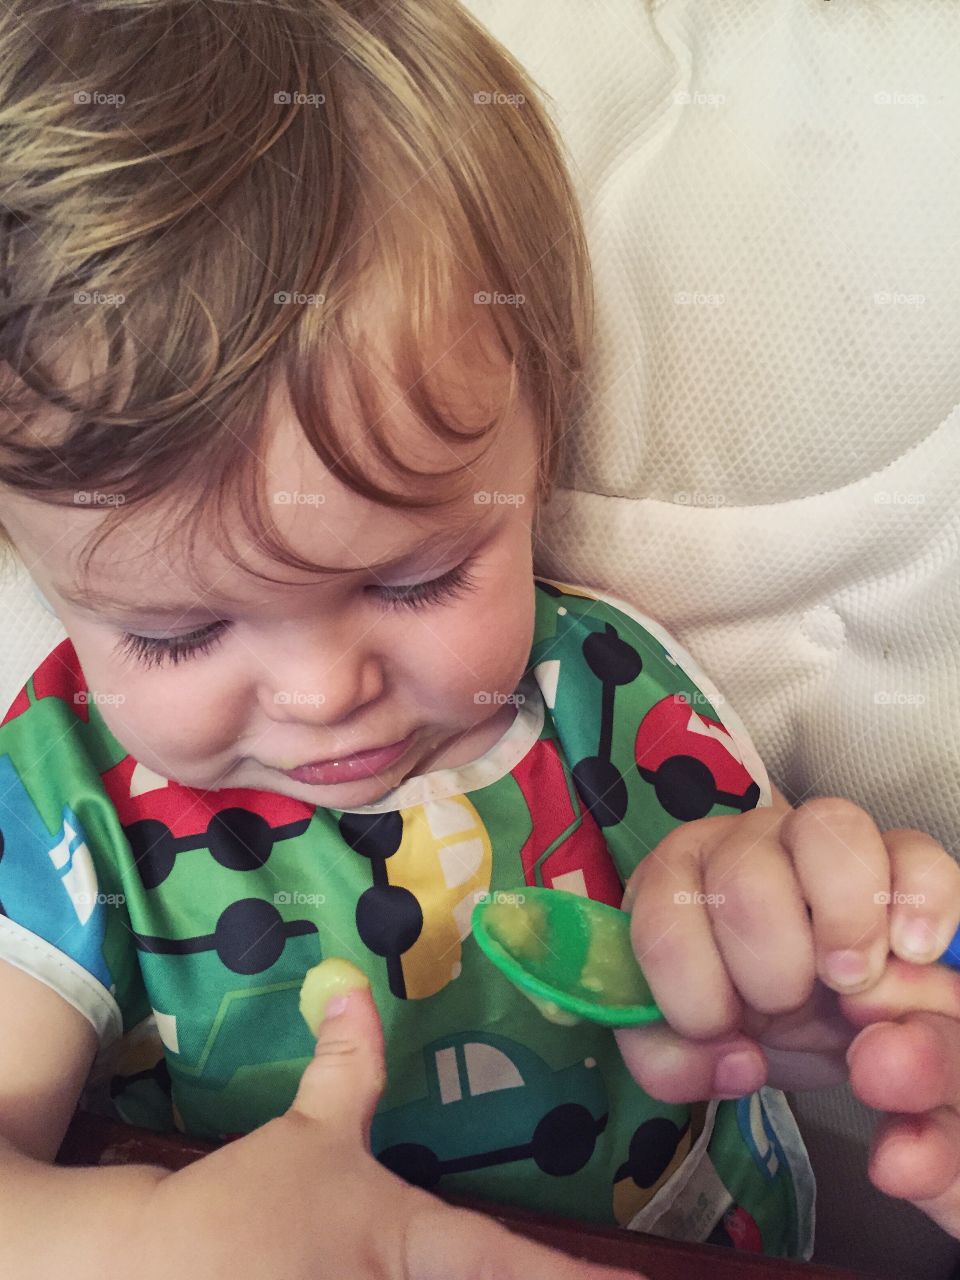 Cute toddler holding spoon with cream on thumb